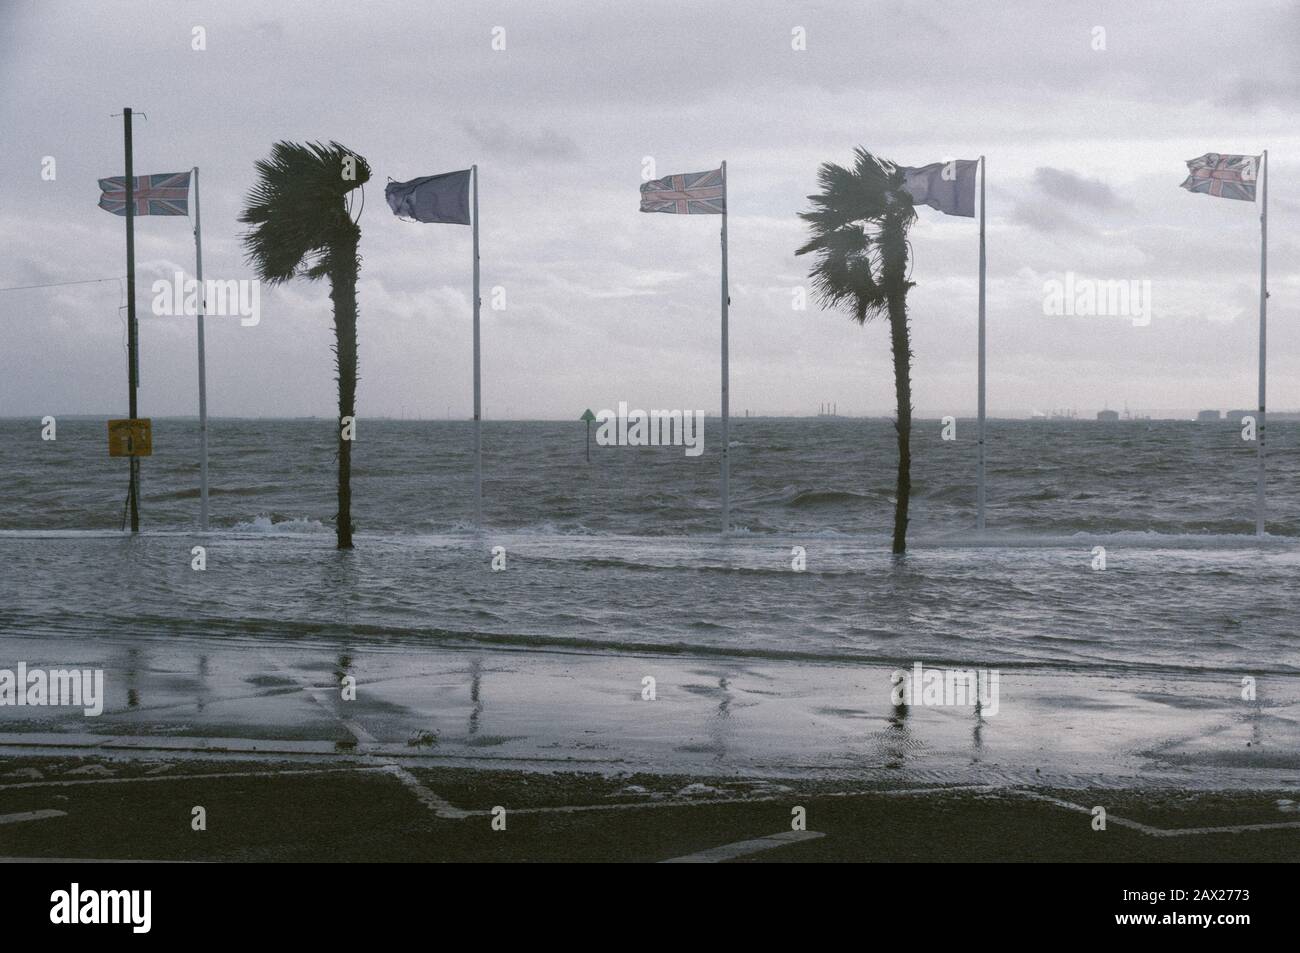 Southend, Essex, UK - 10 february 2020: Storm Ciara Brings high winds and rough seas to Britains coastlines. Stock Photo